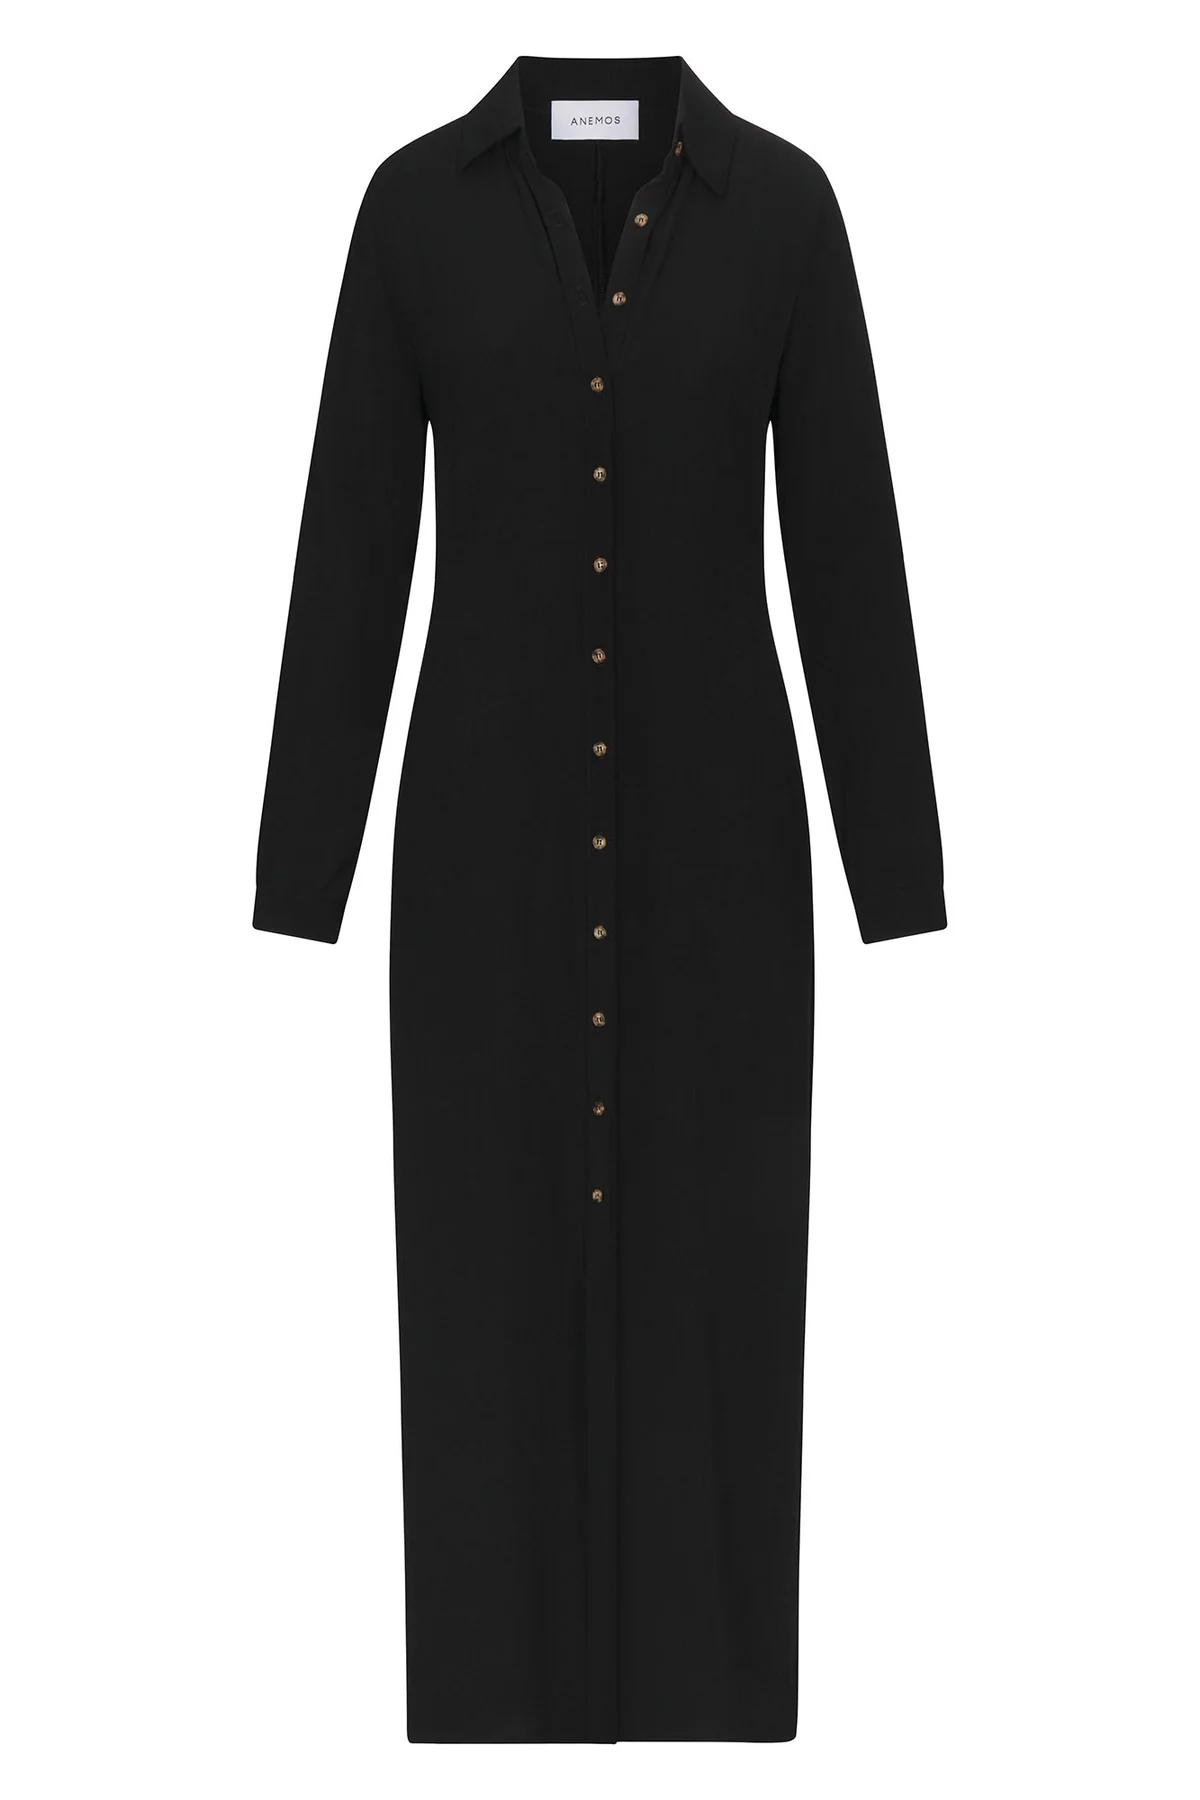 Product Image for Collared Button-Down Maxi Shirt Dress, Black